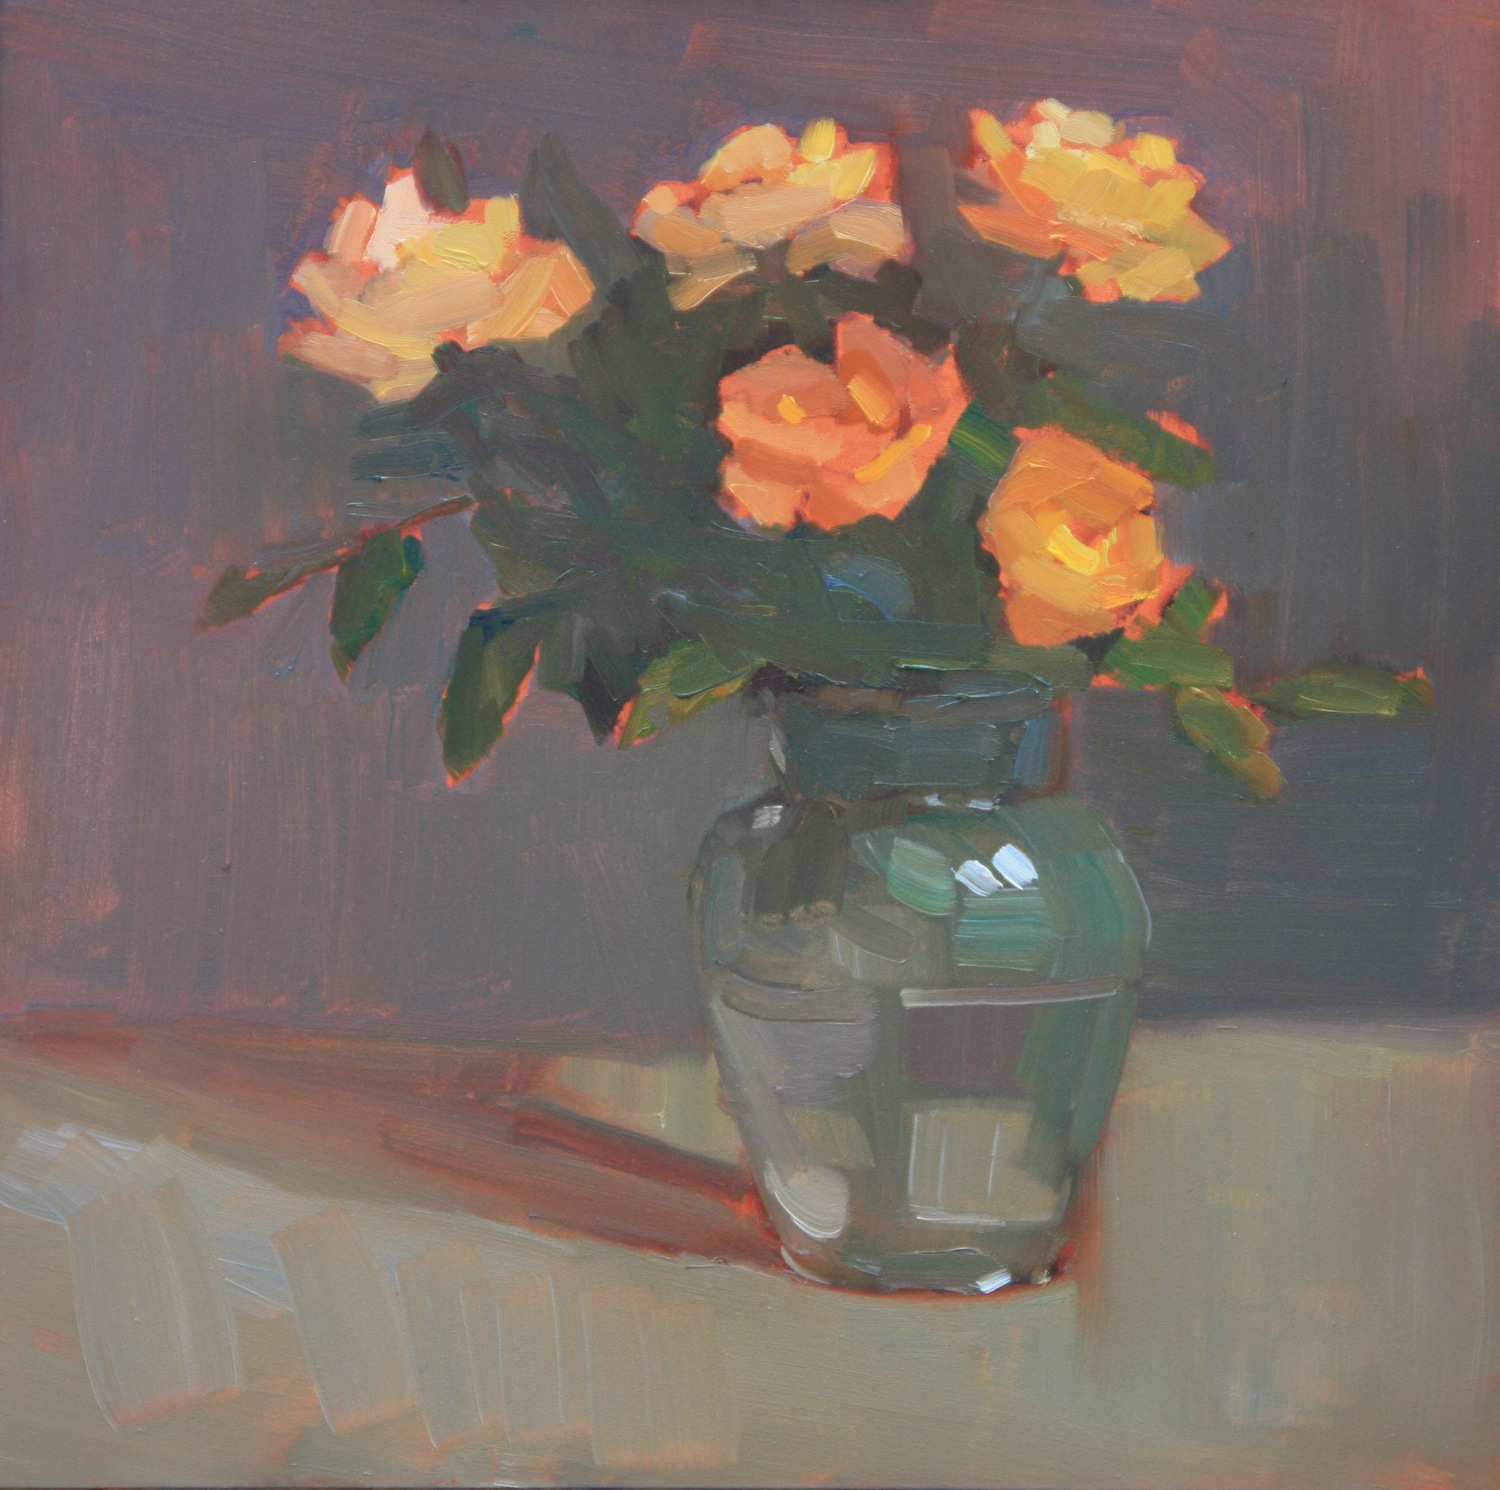 Glass Filled with Orange Roses